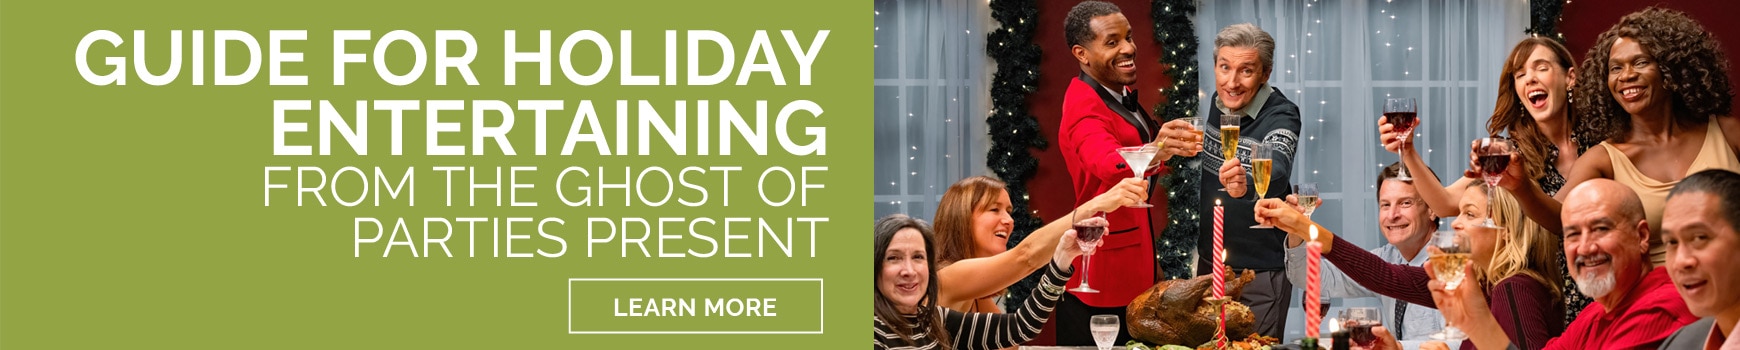 Guide for Holiday Entertaining From The Ghost of Parties Present. Learn More